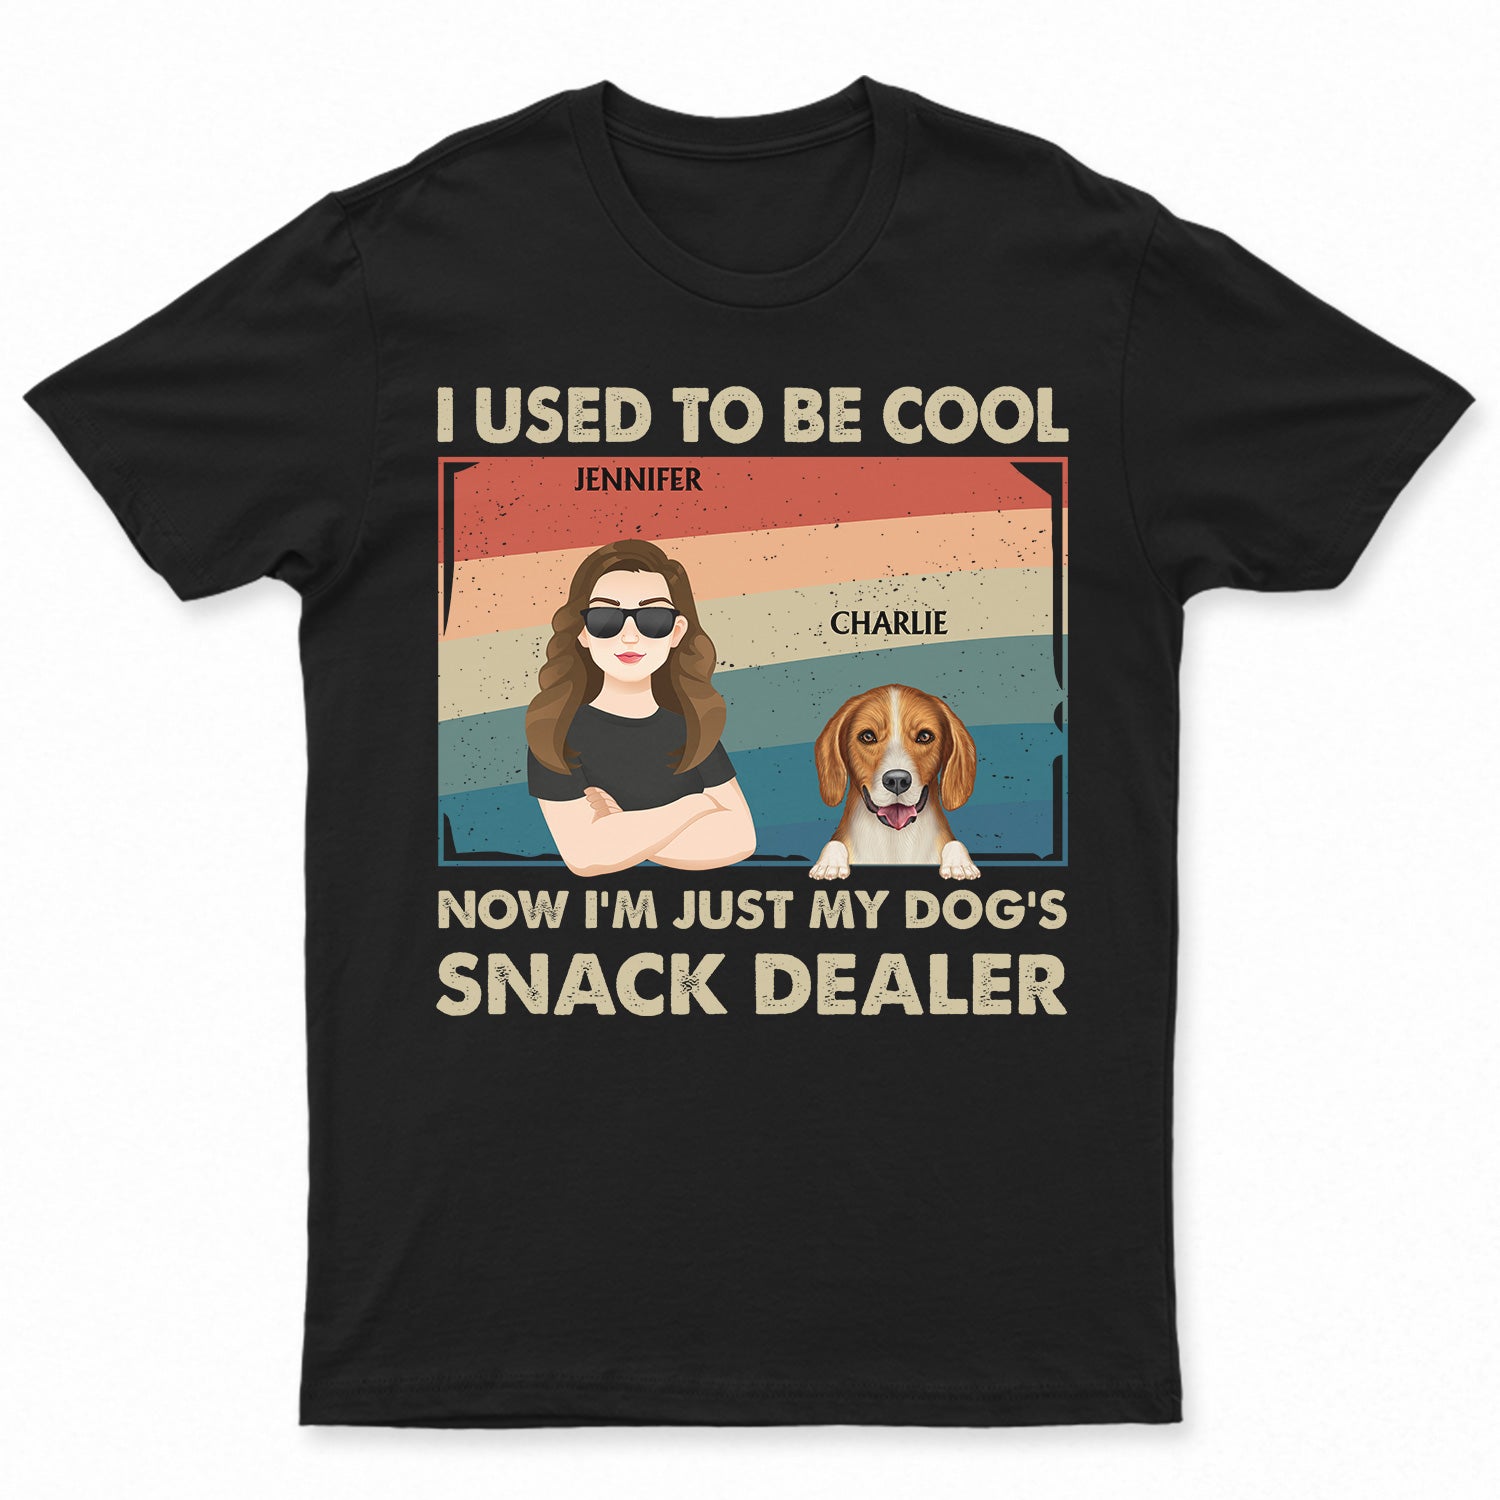 I Used To Be Cool - Gift For Dog Lovers, Dog Mom, Dog Dad - Personalized T Shirt